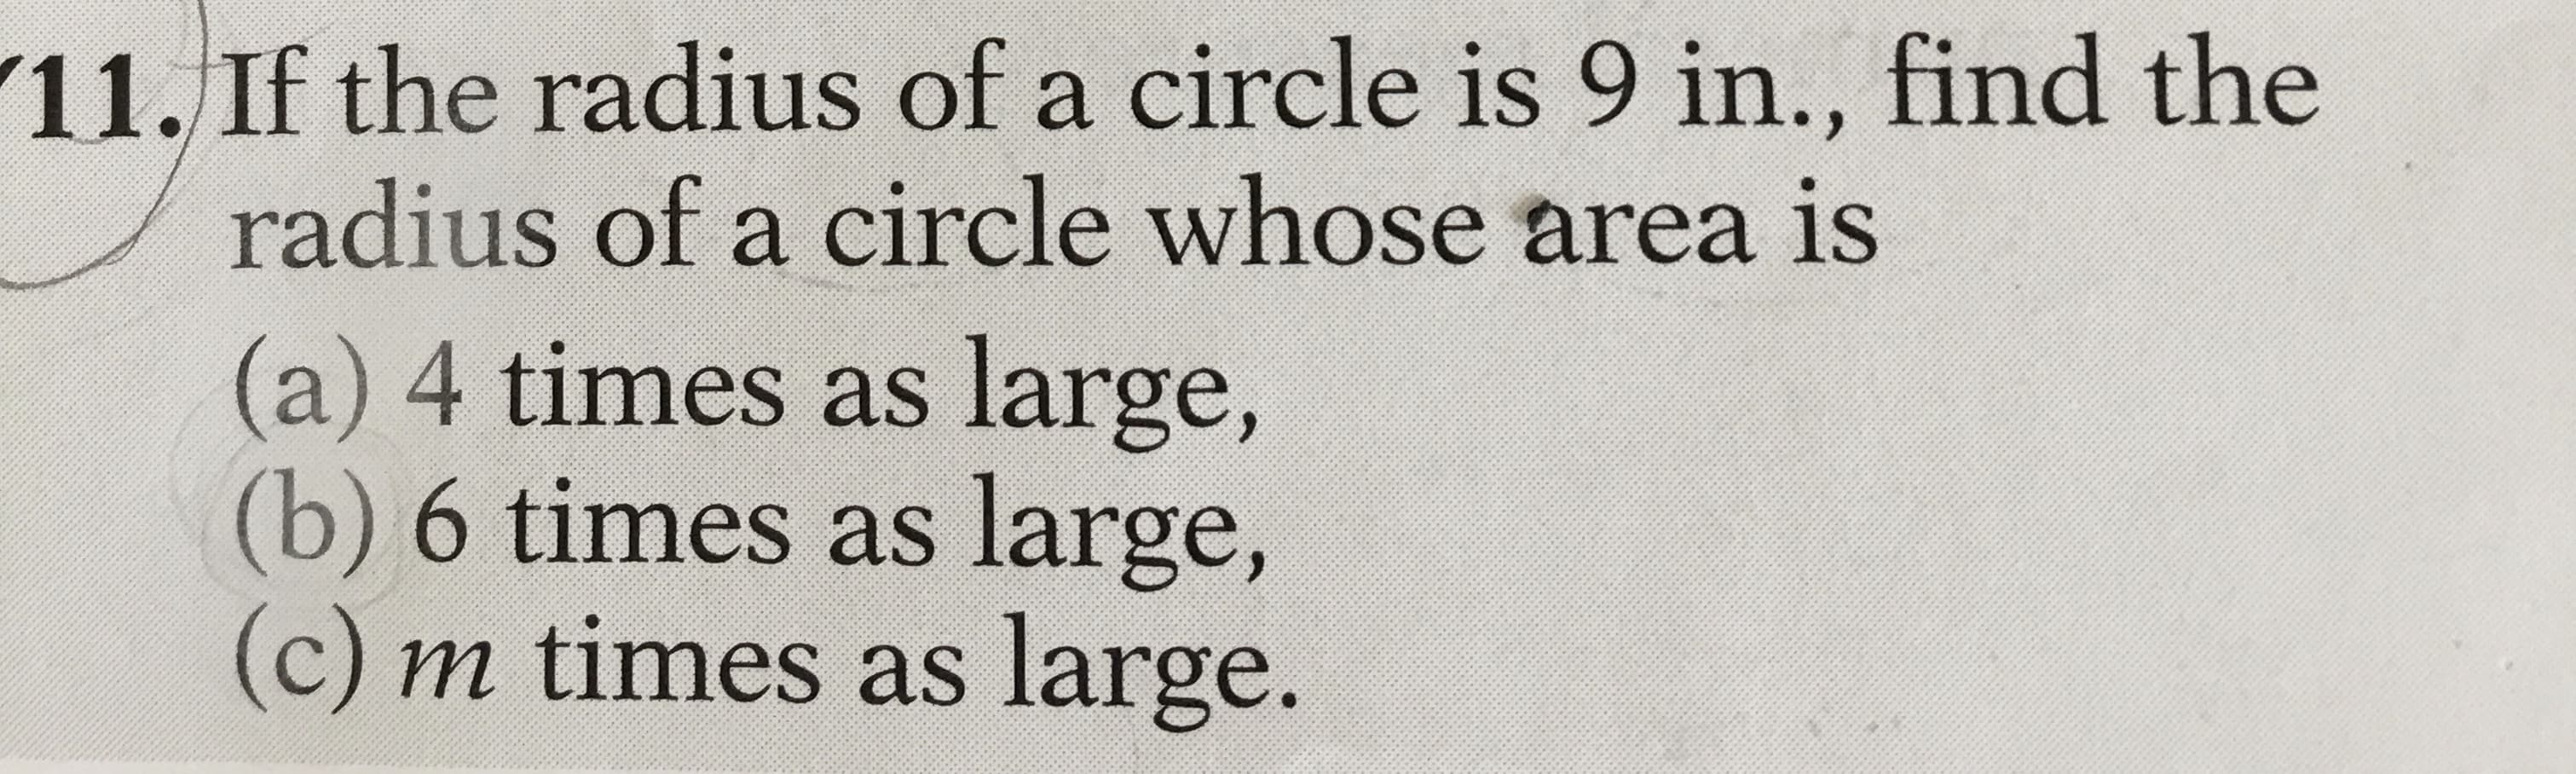 11. If the radius of a circle is 9 in., find the
radius of a circle whose area is
(a) 4 times as large,
(b) 6 times as large,
(c) m times as large.
